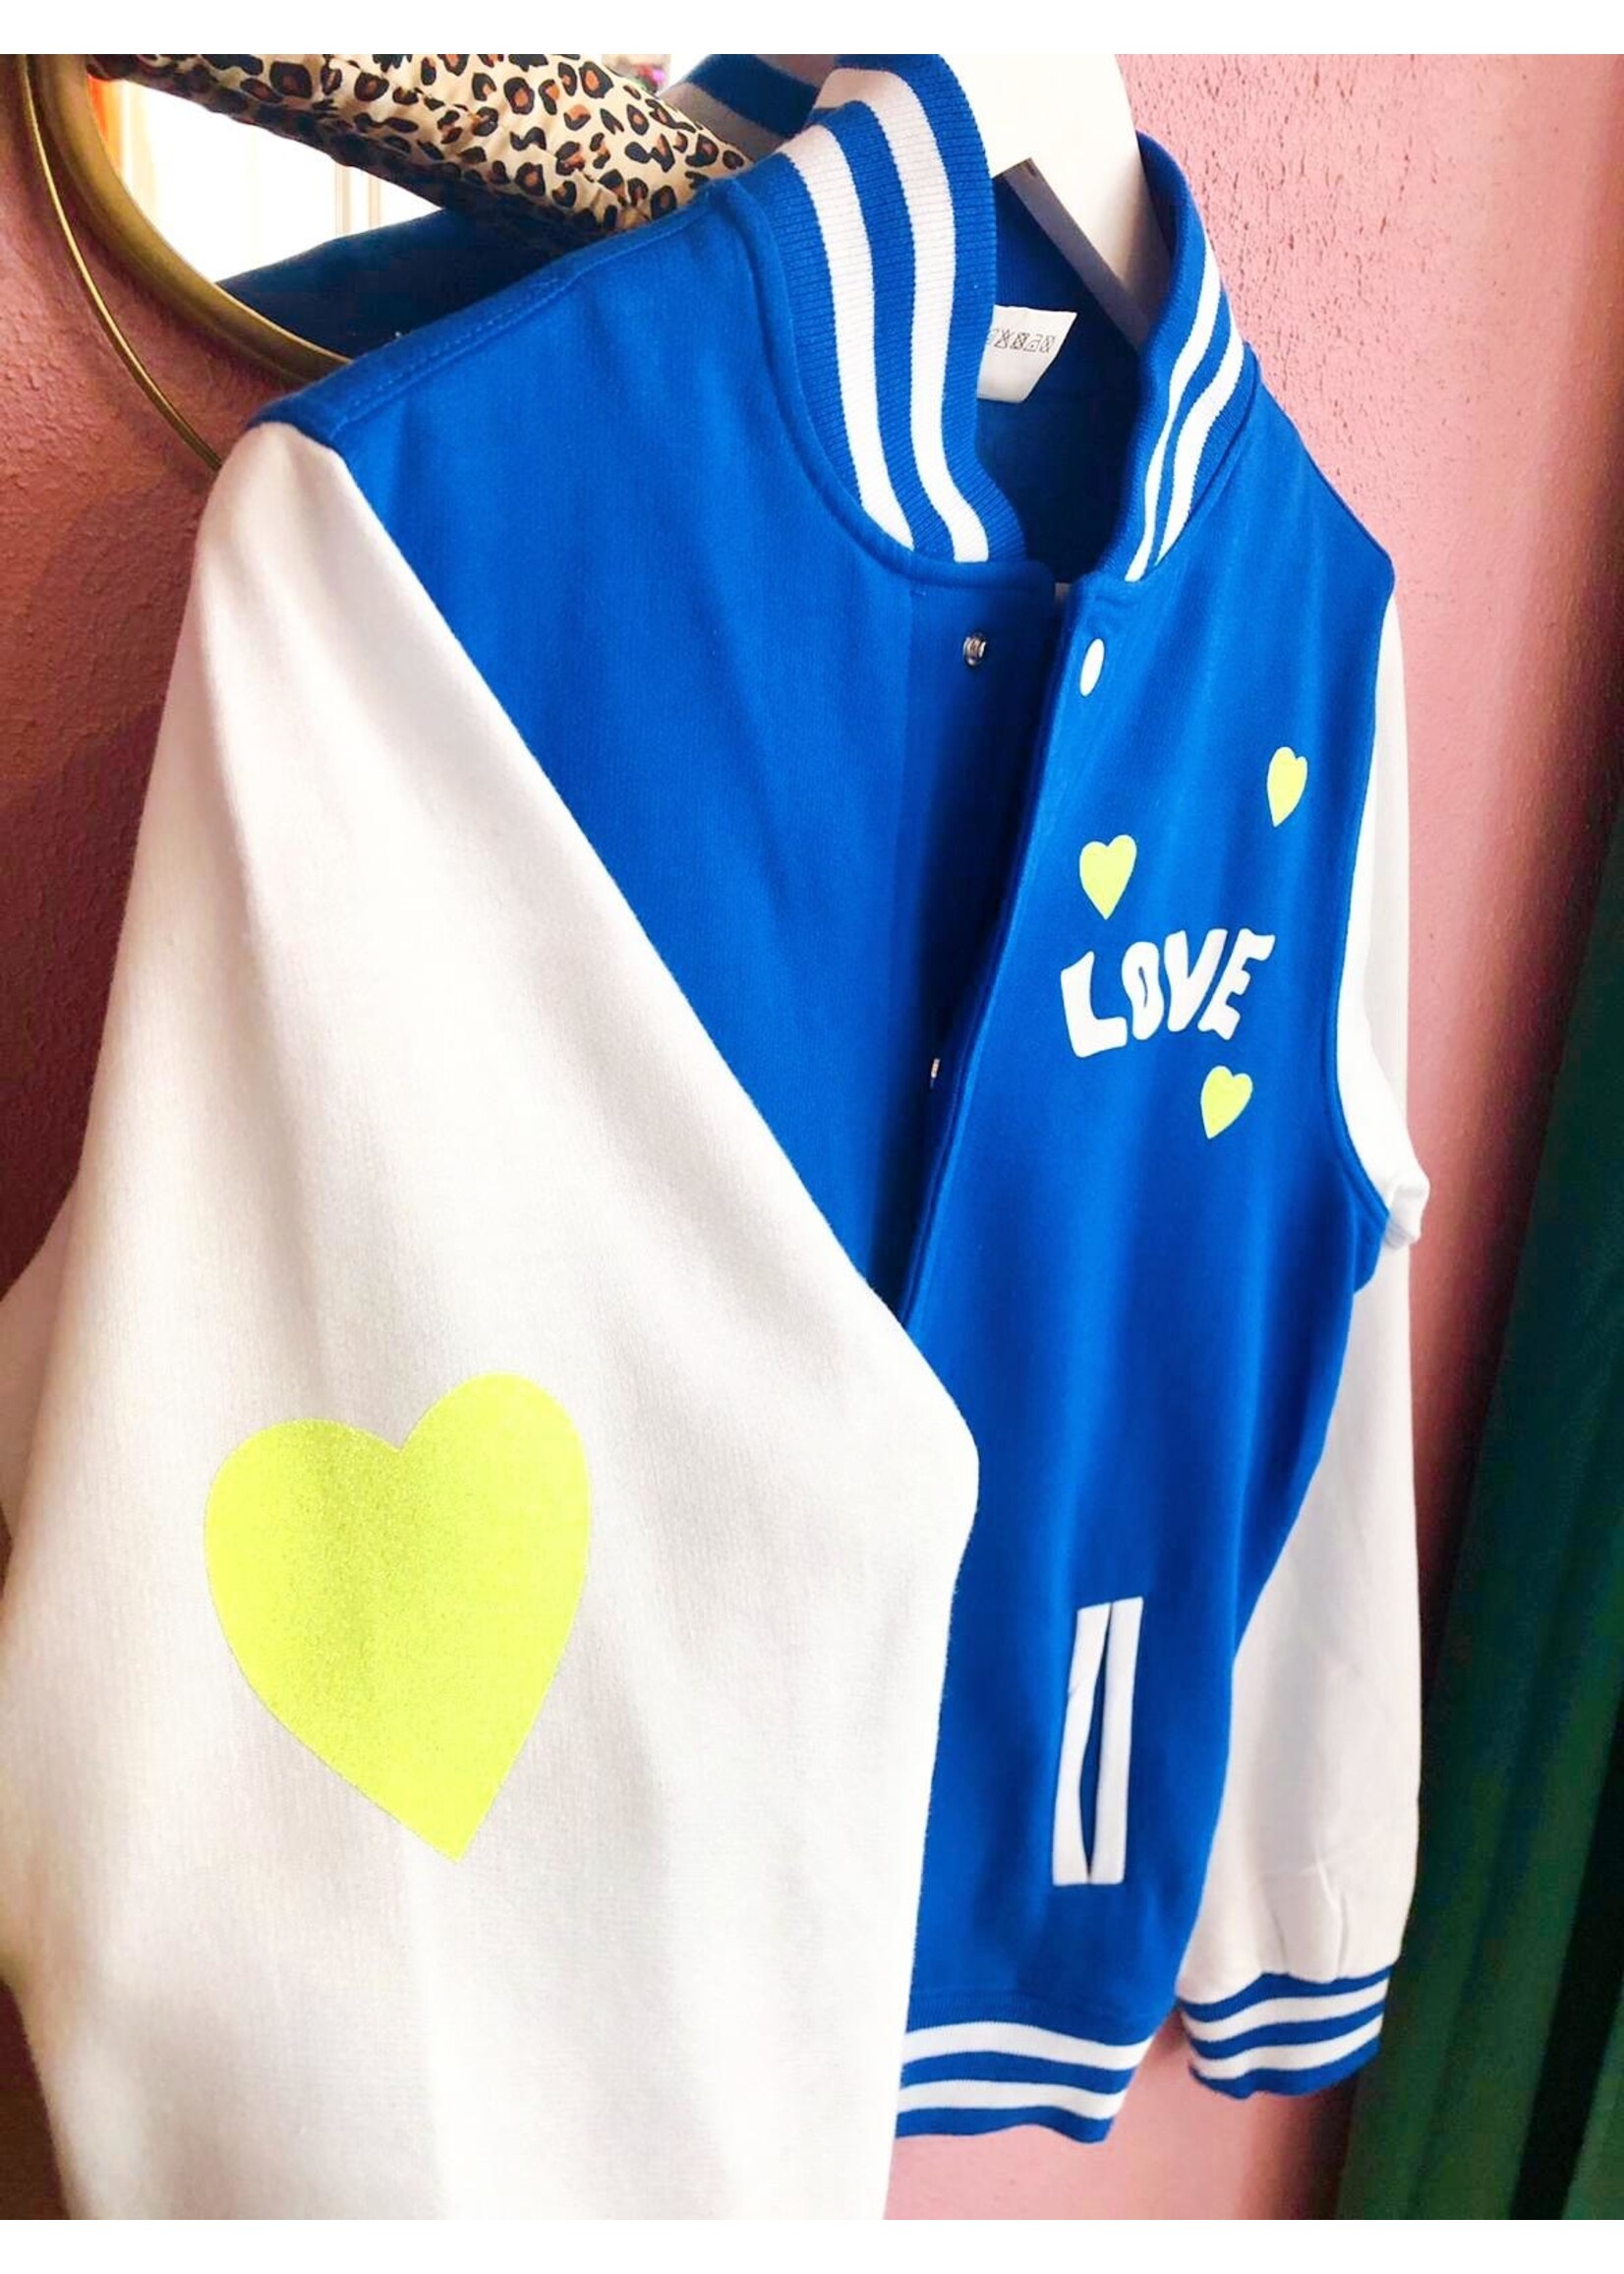 YOU ARE SPECIAL "Love Is Blind" Blue Baseball Jacket